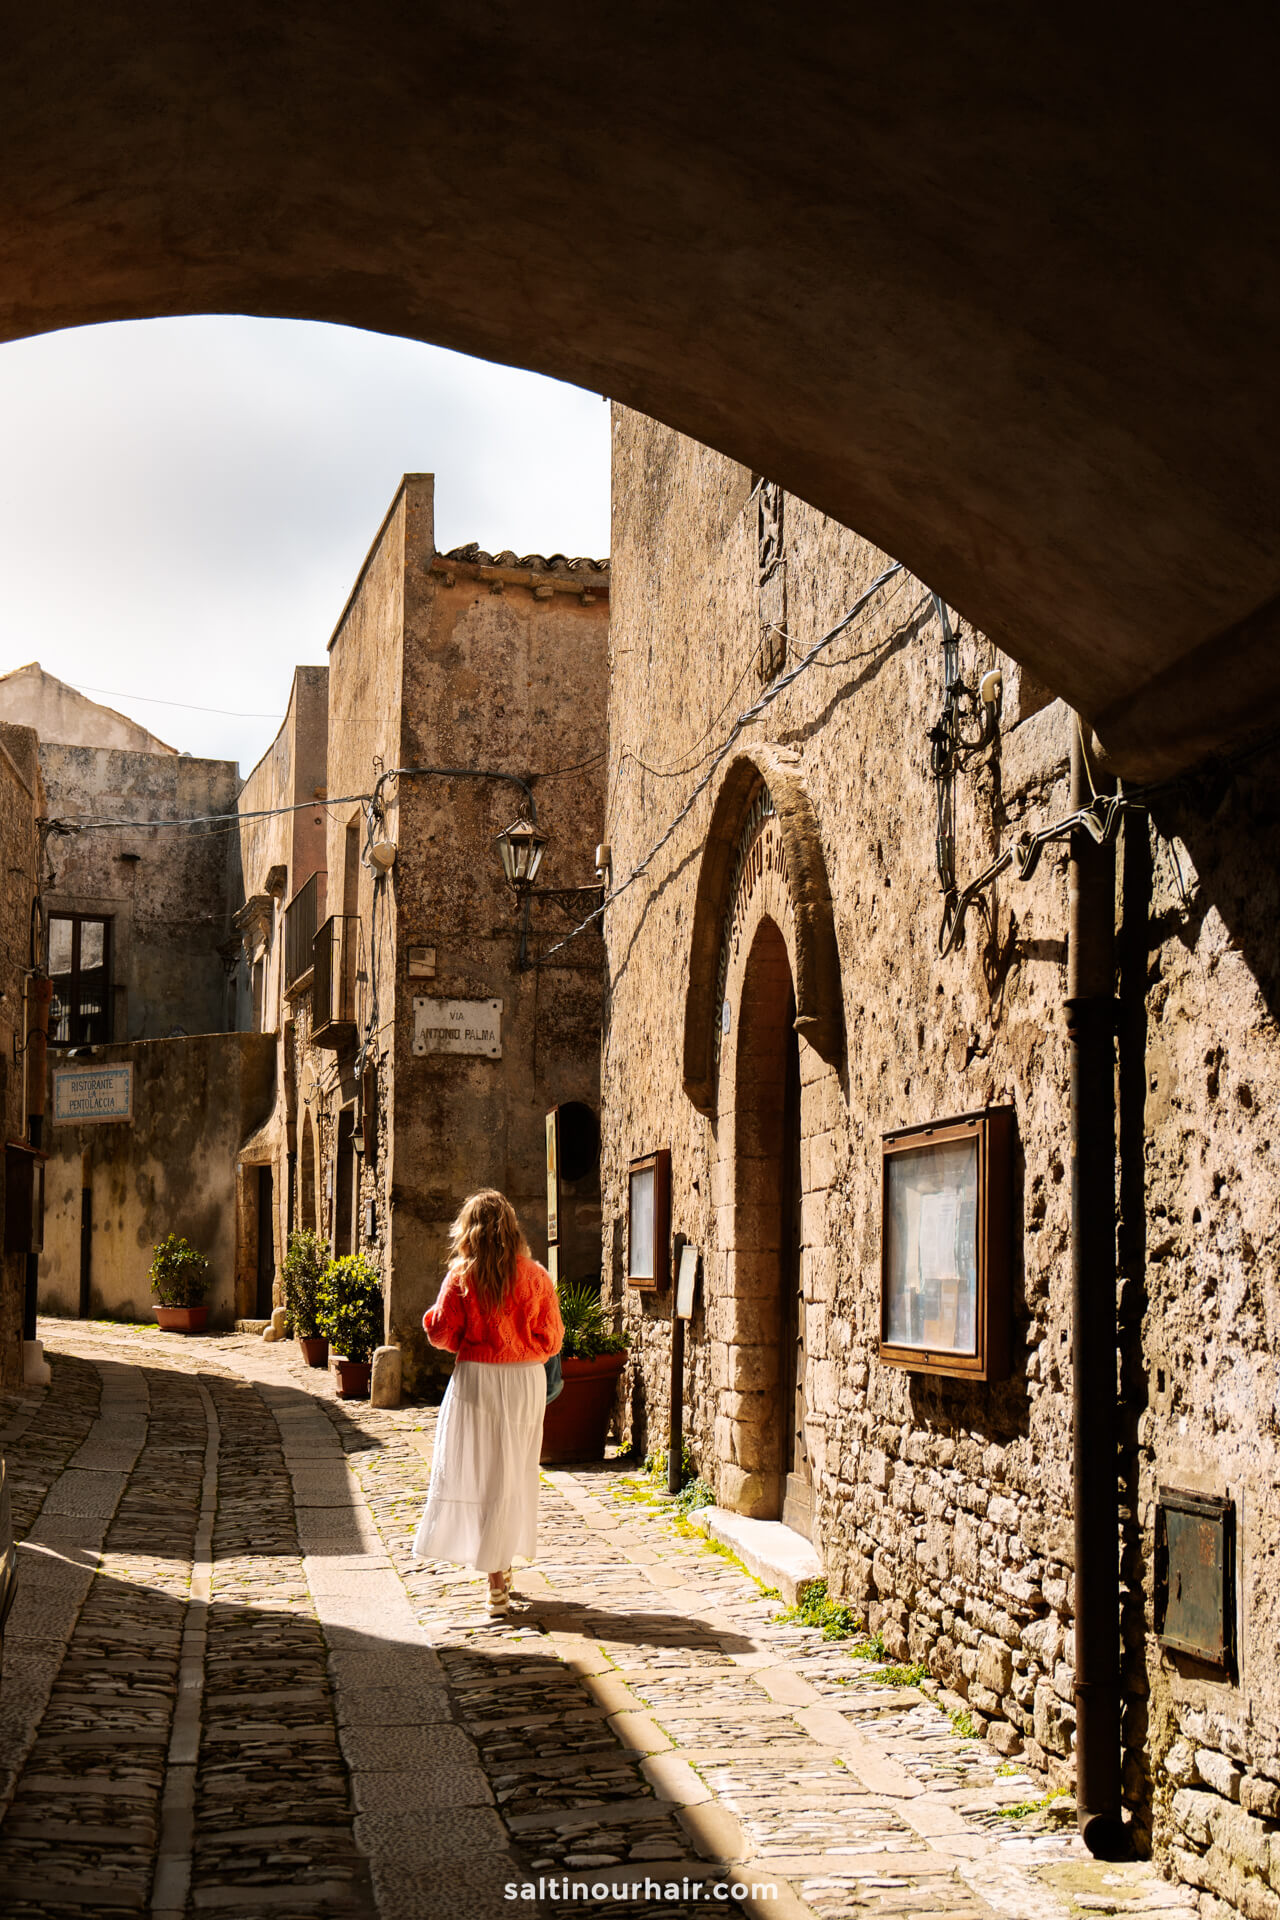 What to do in Sicily erice